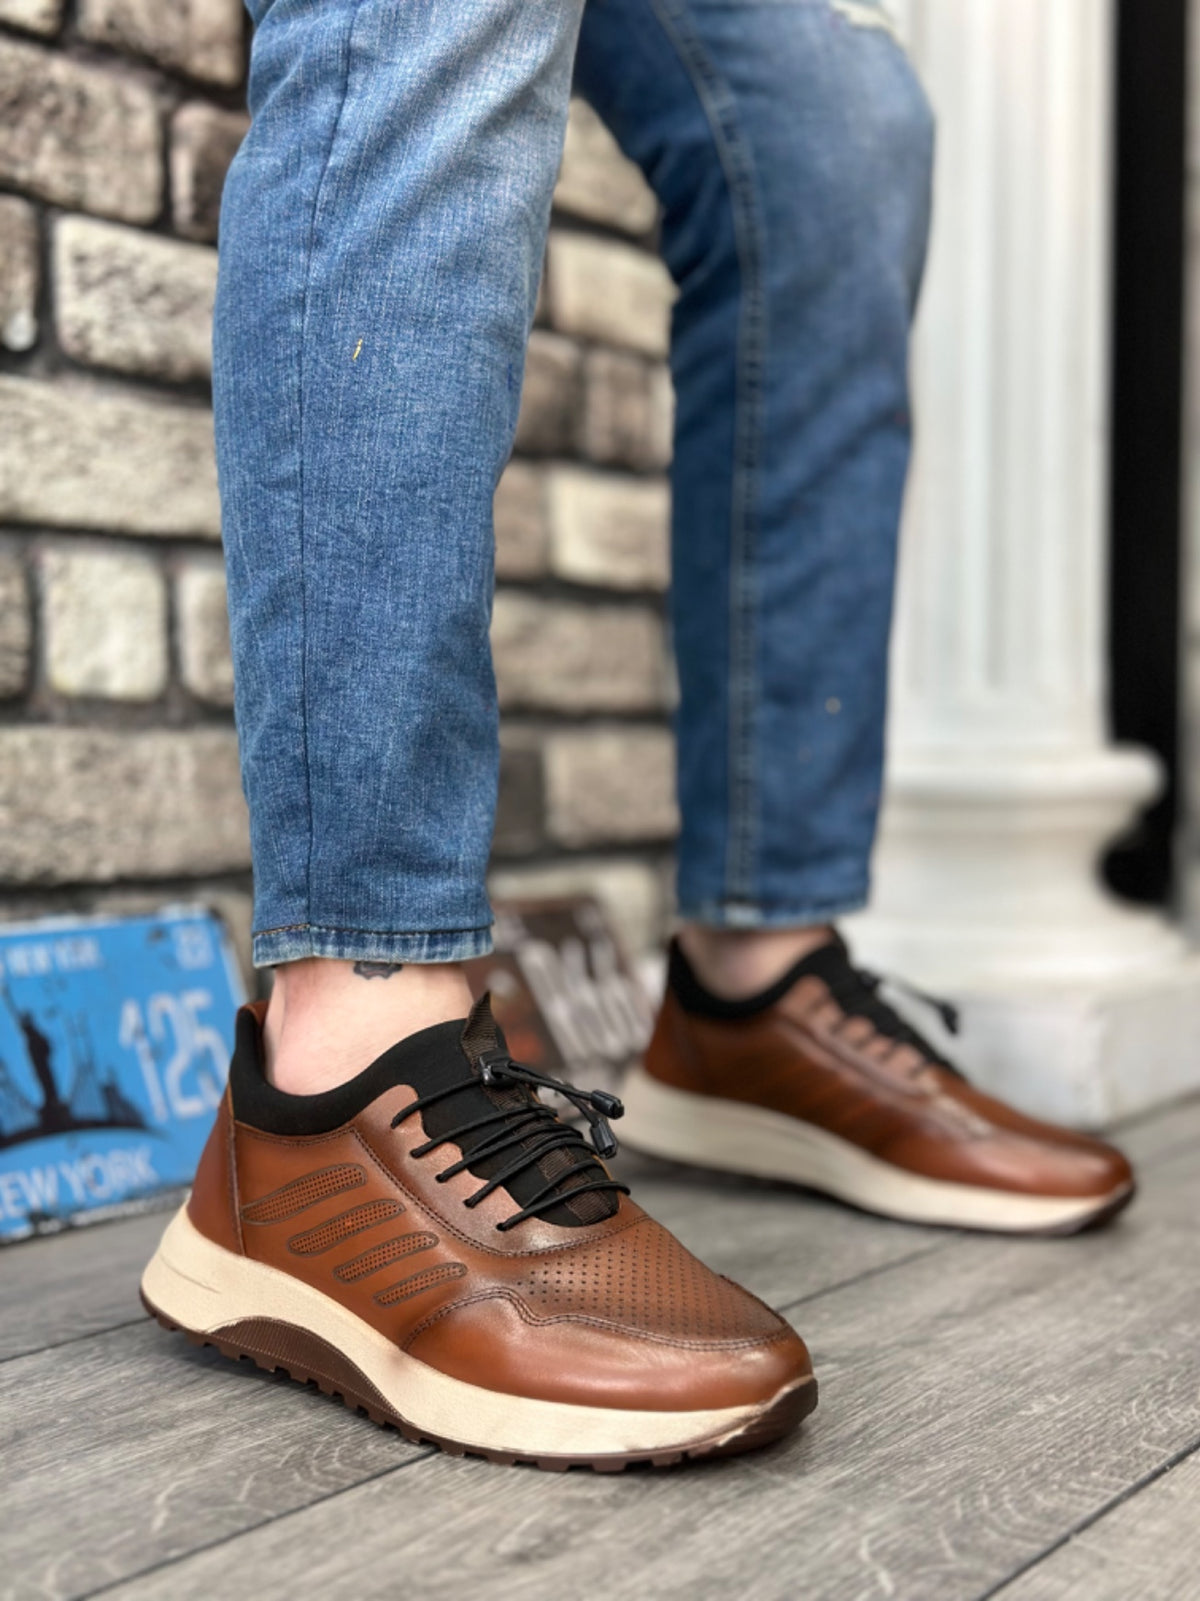 BA0335 Genuine Leather Comfortable Sole Adjustable Rubber Laced Tan Casual Men's Shoes - STREETMODE™